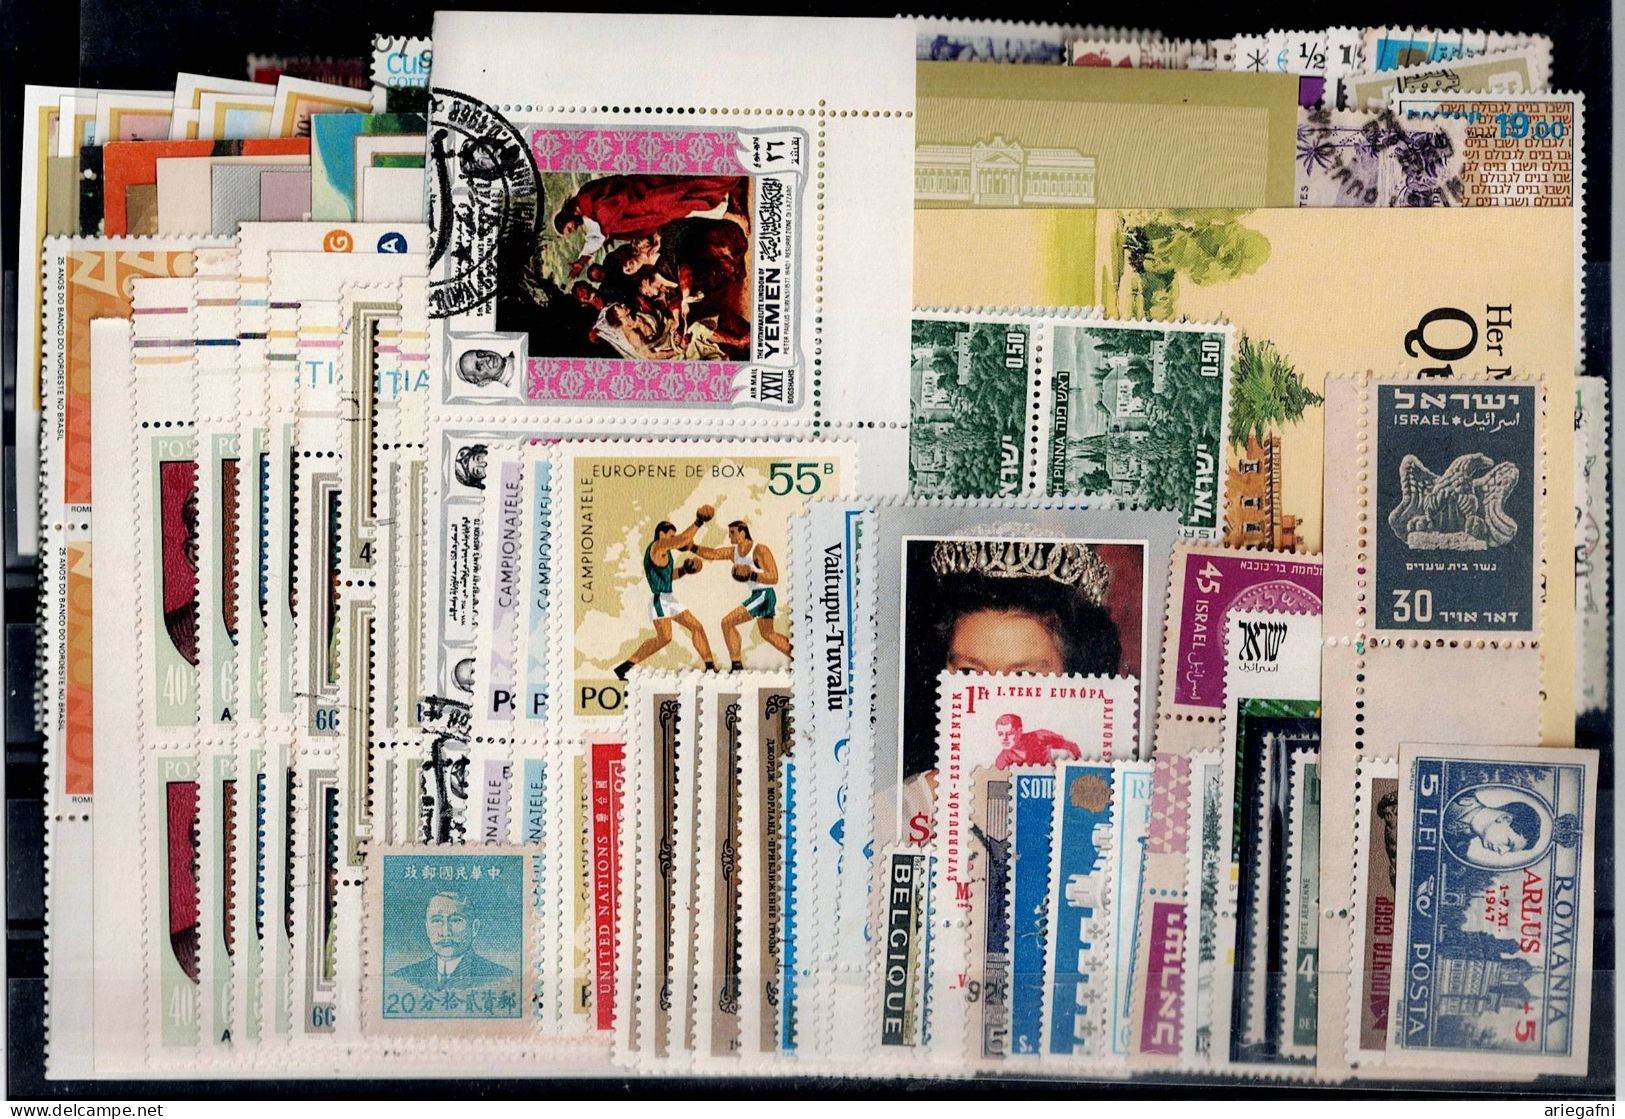 LOT OF 284 STAMPS MINT+USED+ 16 BLOCKS MI- 98 EURO VF!! - Collections (sans Albums)